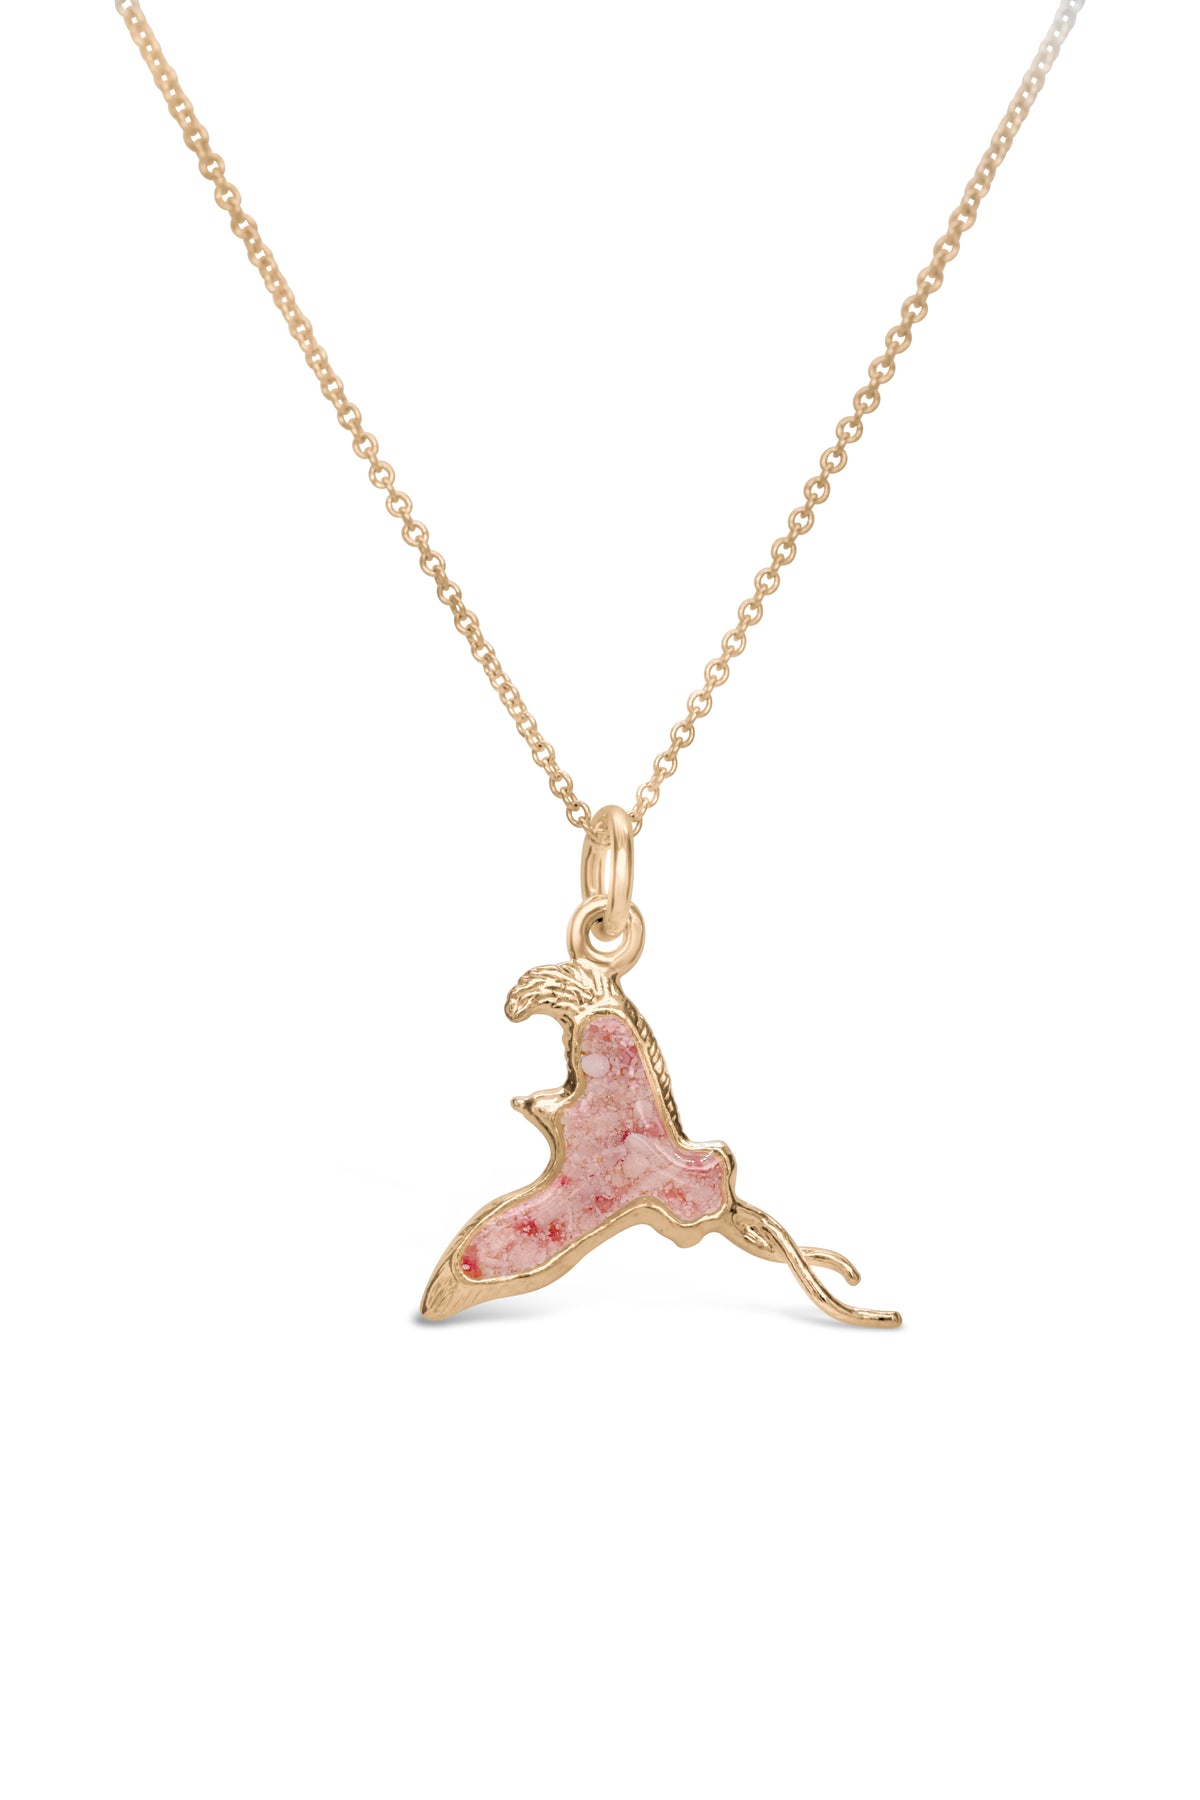 Longtail ~ Small Pendant in Gold